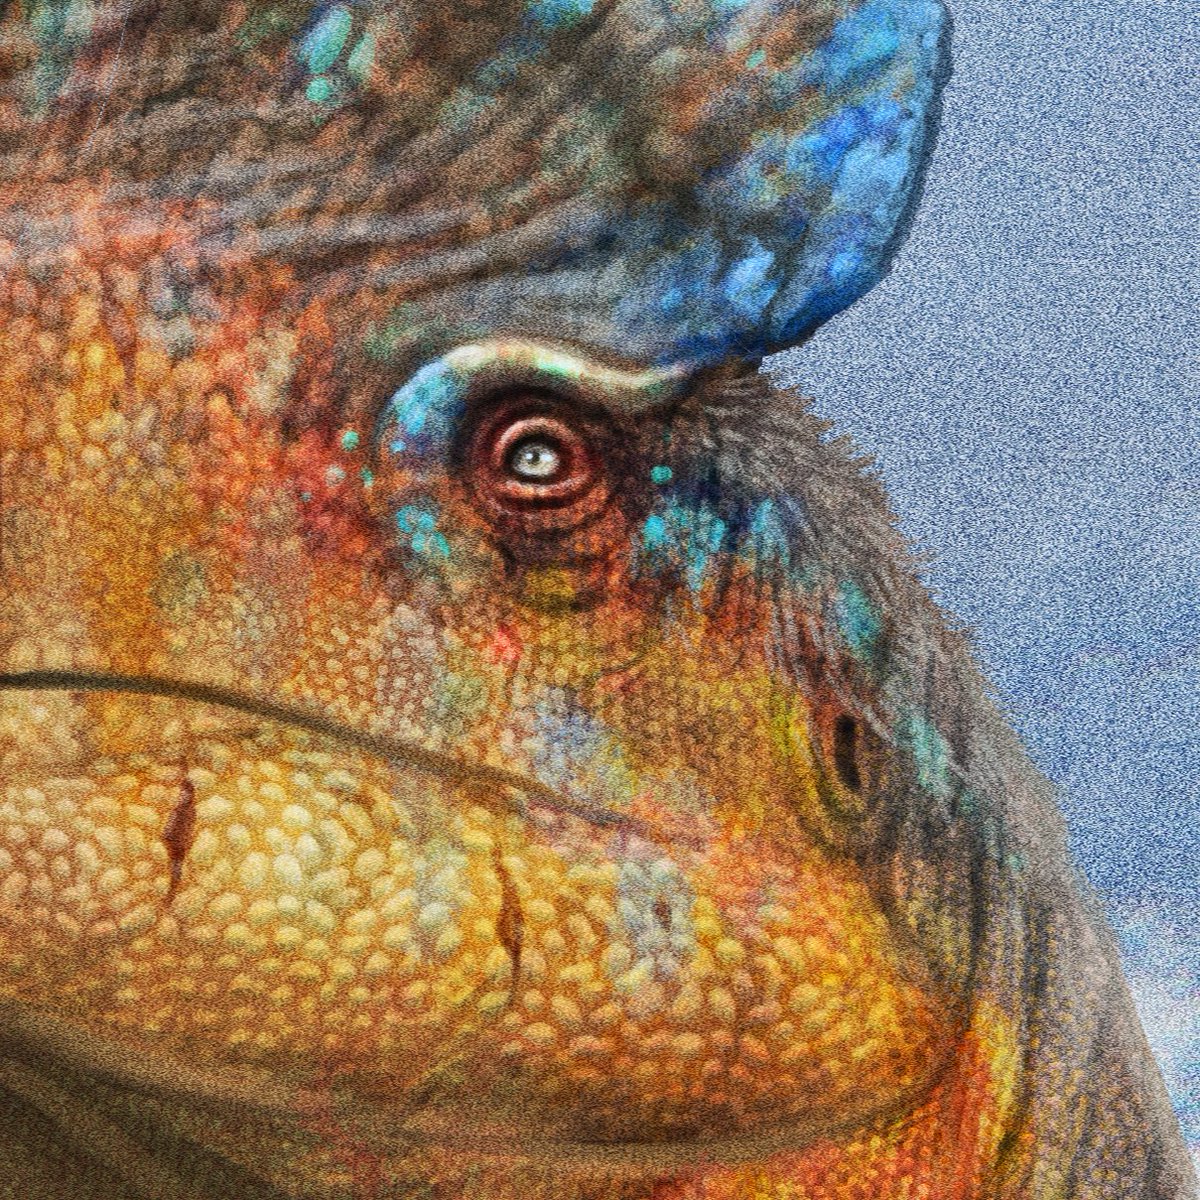 It's a privilege to once again have Gabriel Ugueto illustrating more Beasts of the Mesozoic package art, and here's a sneak peek at his Dilophosaurus wetherilli!
@SerpenIllus #beastsofthemesozoic